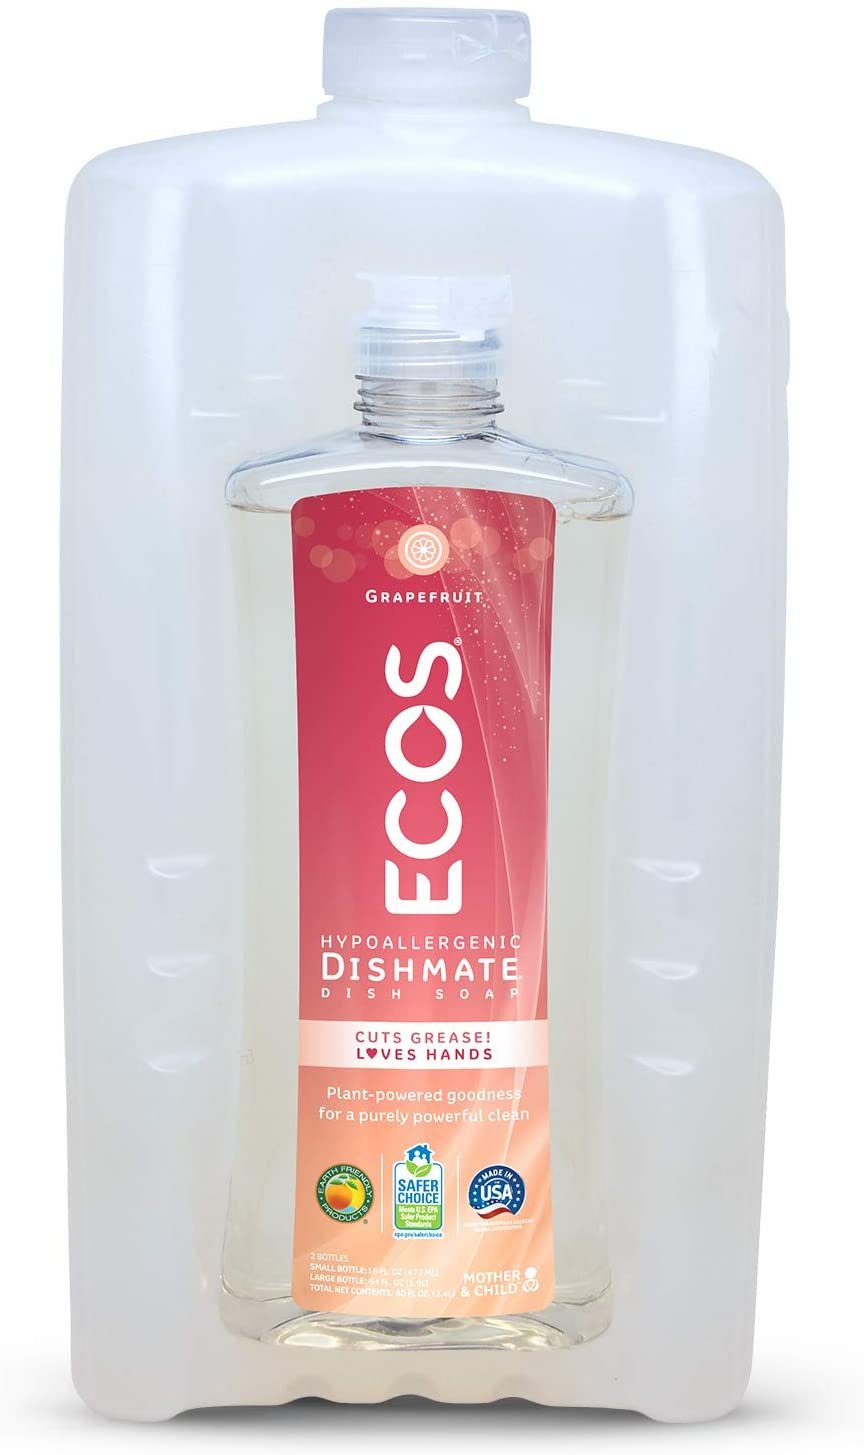 Non Toxic, Hypoallergenic Dishmate,  Grapefruit, Ultra-Concentrated,  Without Dyes, Parabens, Phosphates, Phthalates, Pack of  4,  80 FL OZ Per Pack